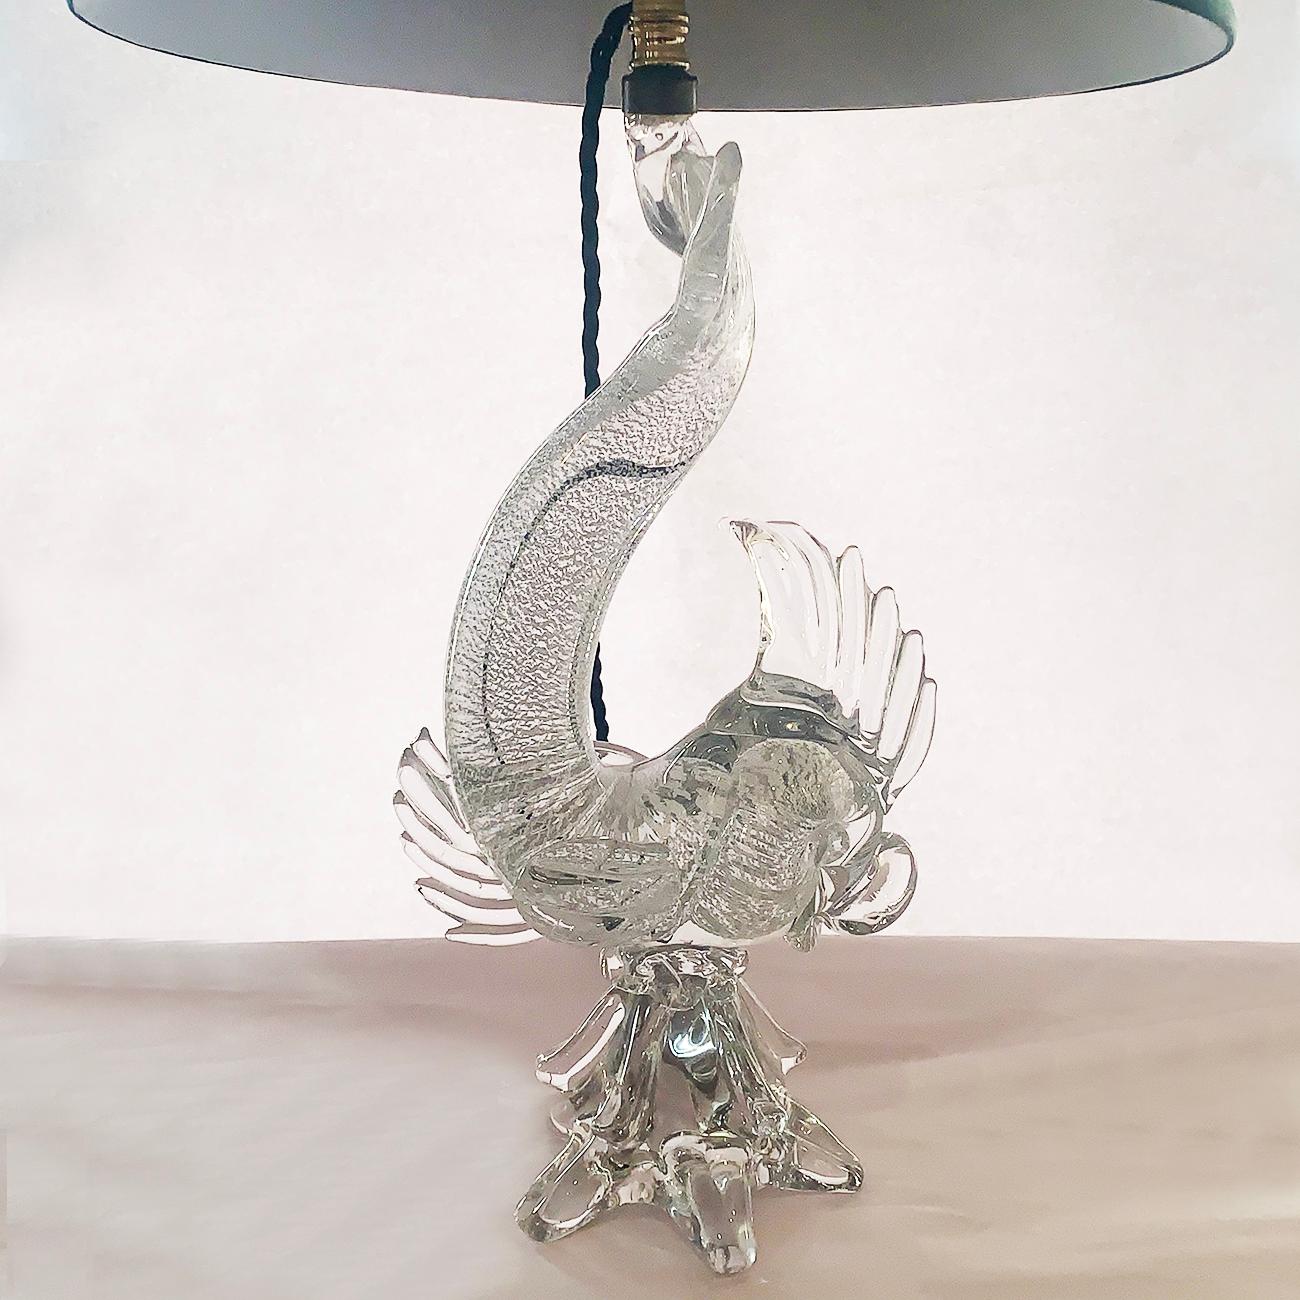 Midcentury Lamp Large Murano Glass Fish with internal decoration. Wonderful handmade art glass with a three dimensional inner layer in lines of white “dust” below the outer surface giving the fish shaped body greater depth, with clear glass above